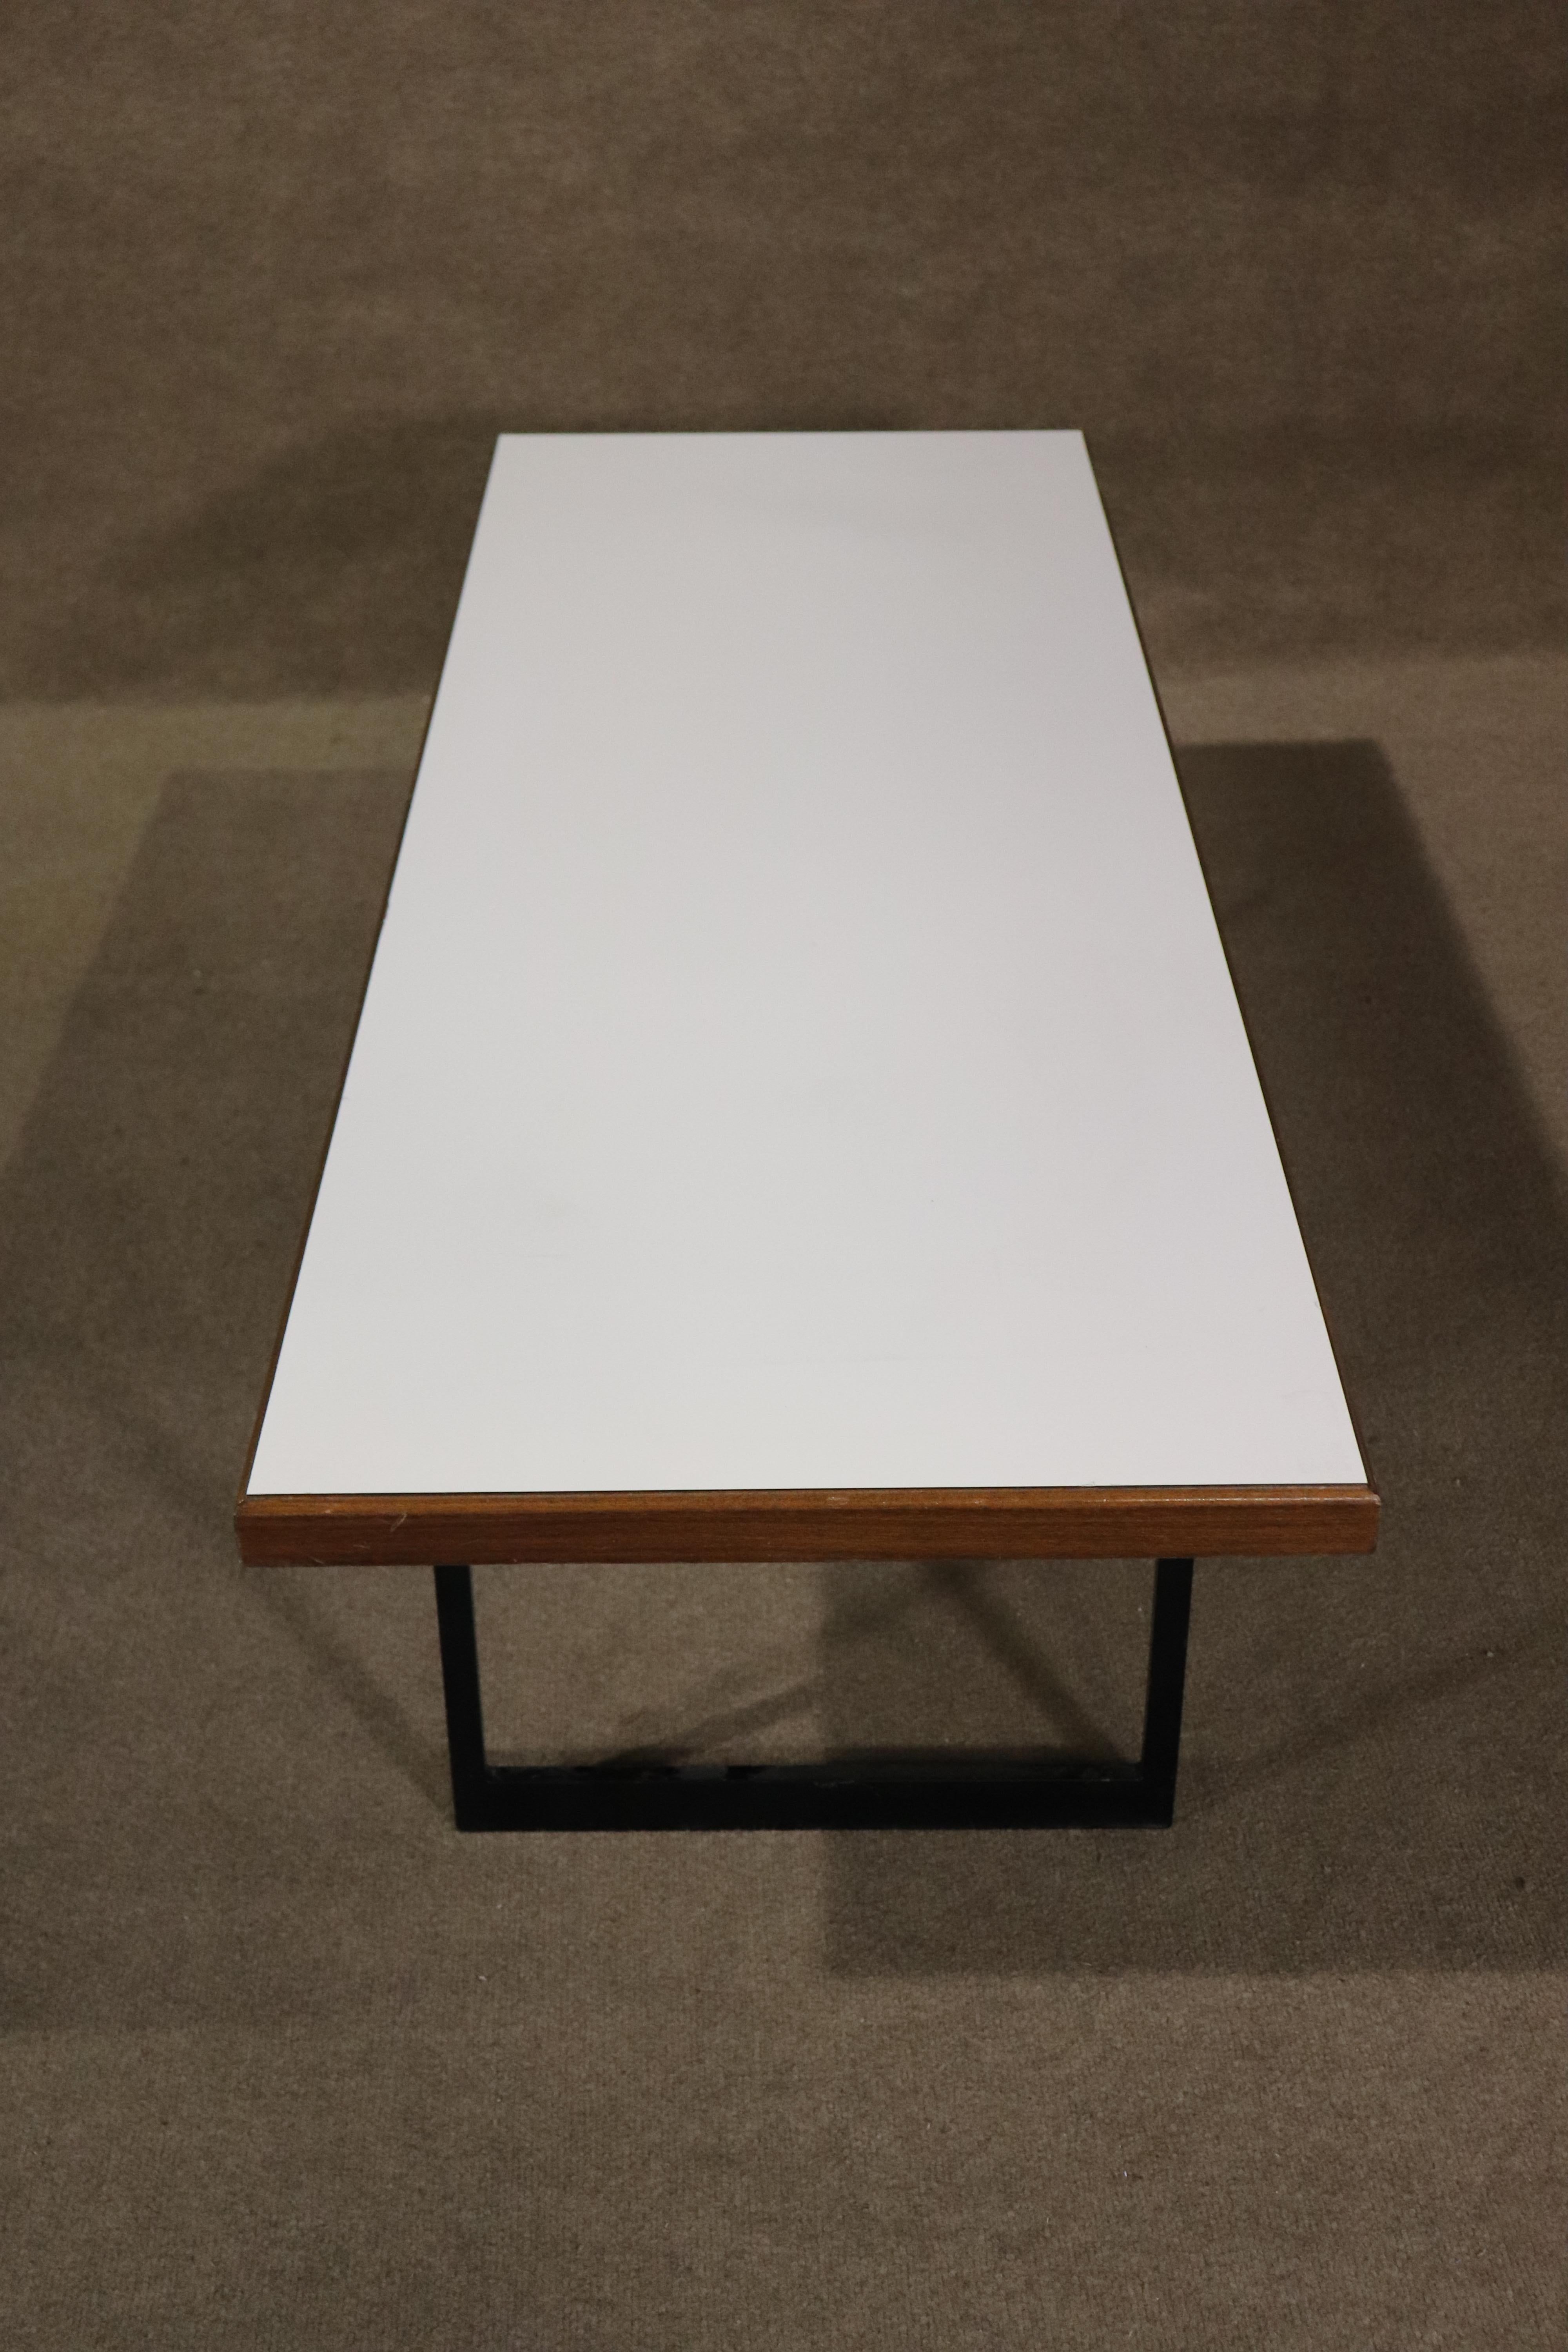 Long five foot table or bench with white laminate top over walnut wood grain. Set on a black metal base.
Please confirm location NY or NJ